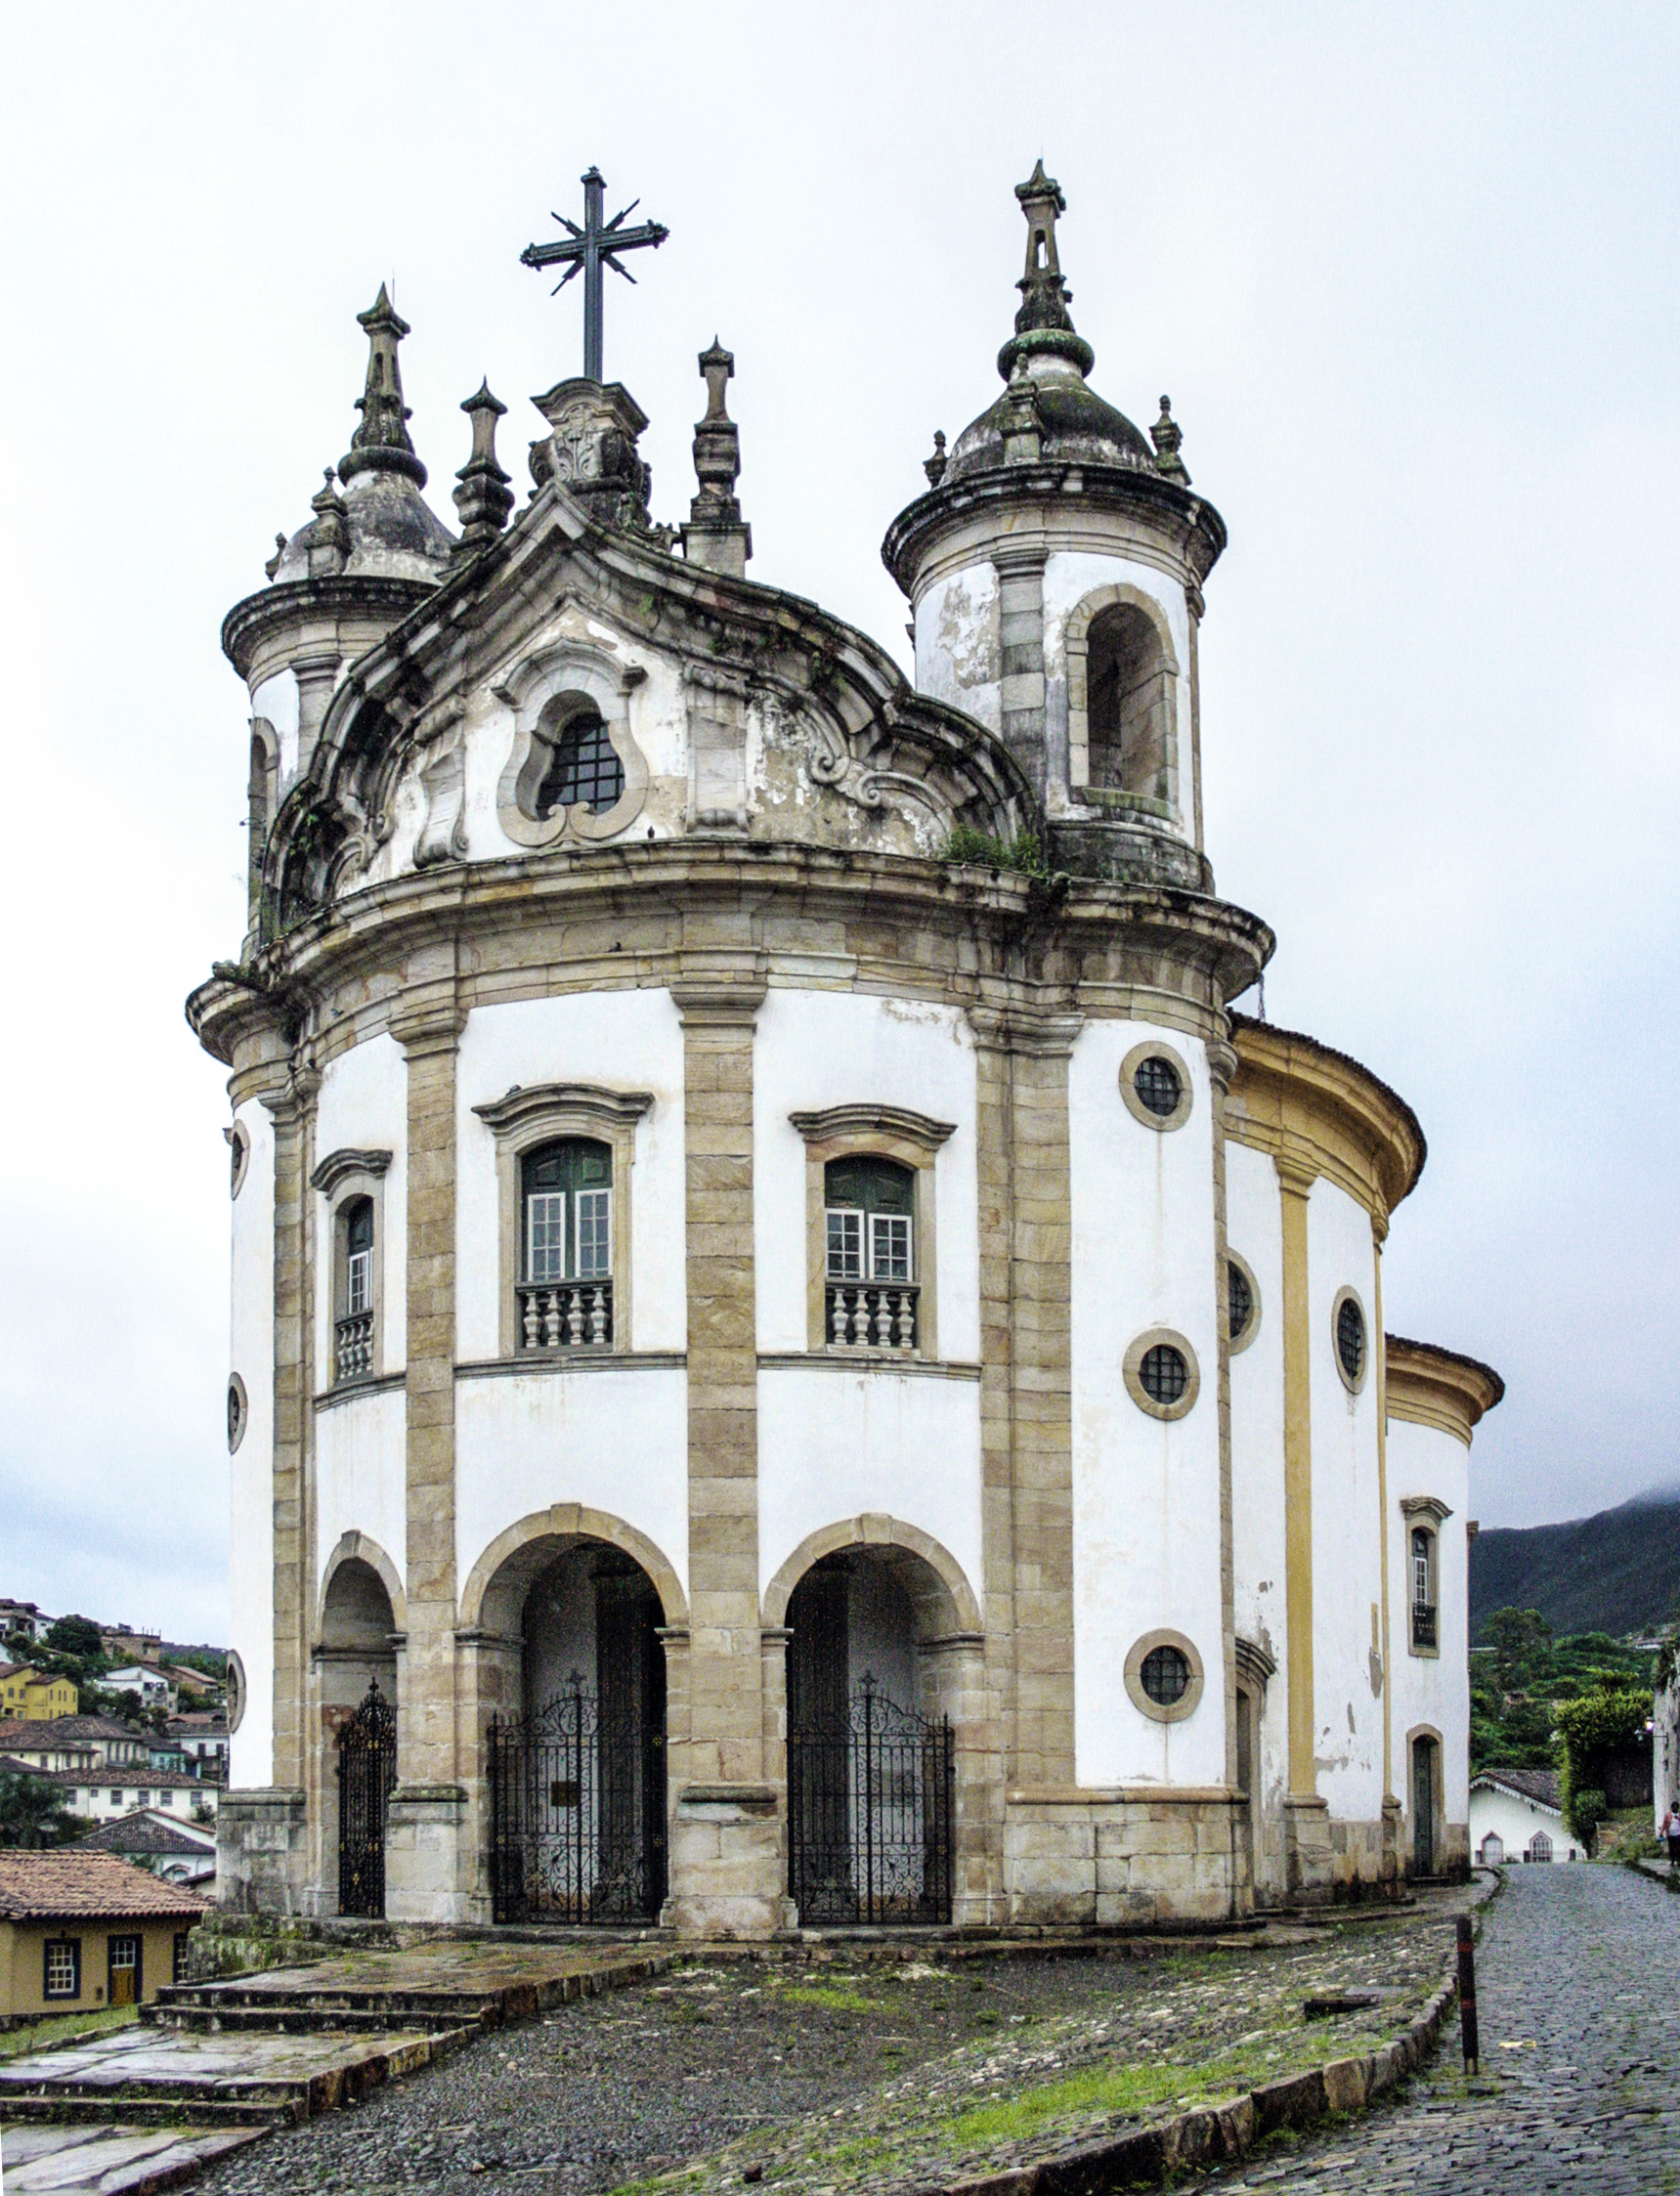 Church of Our Lady of the Rosary, Ouro Preto, Brazil (photo: Juliana Bruder, CC BY-SA 4.0)